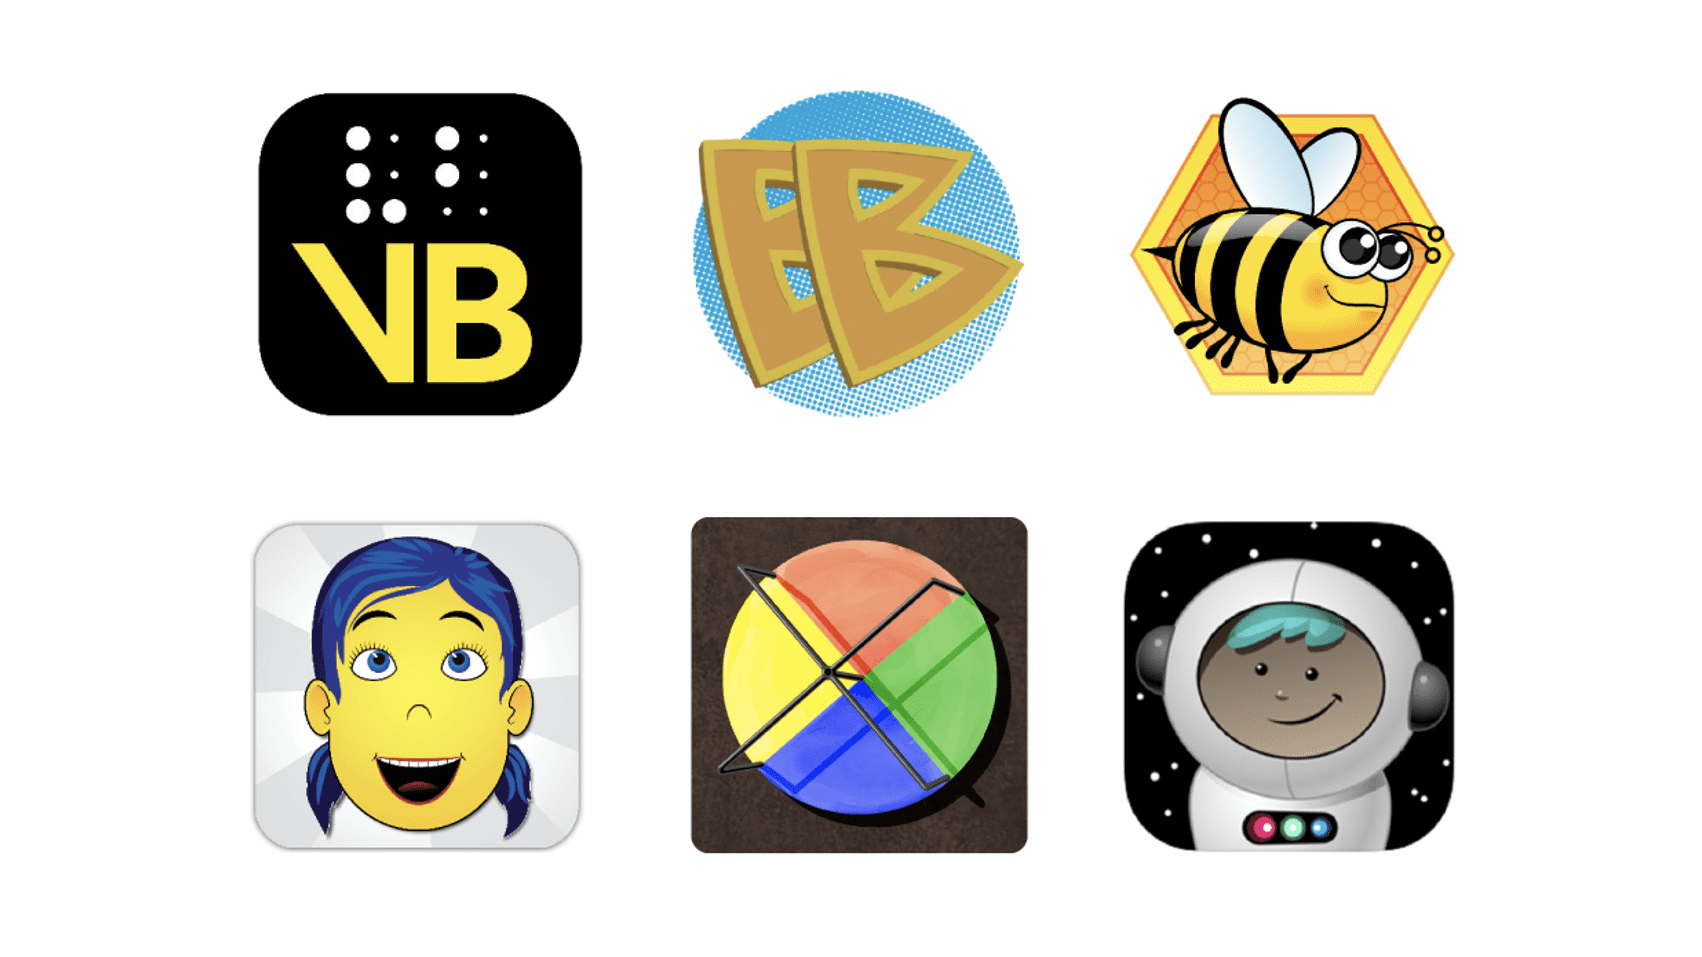 6 app icons for the apps described in the blog.